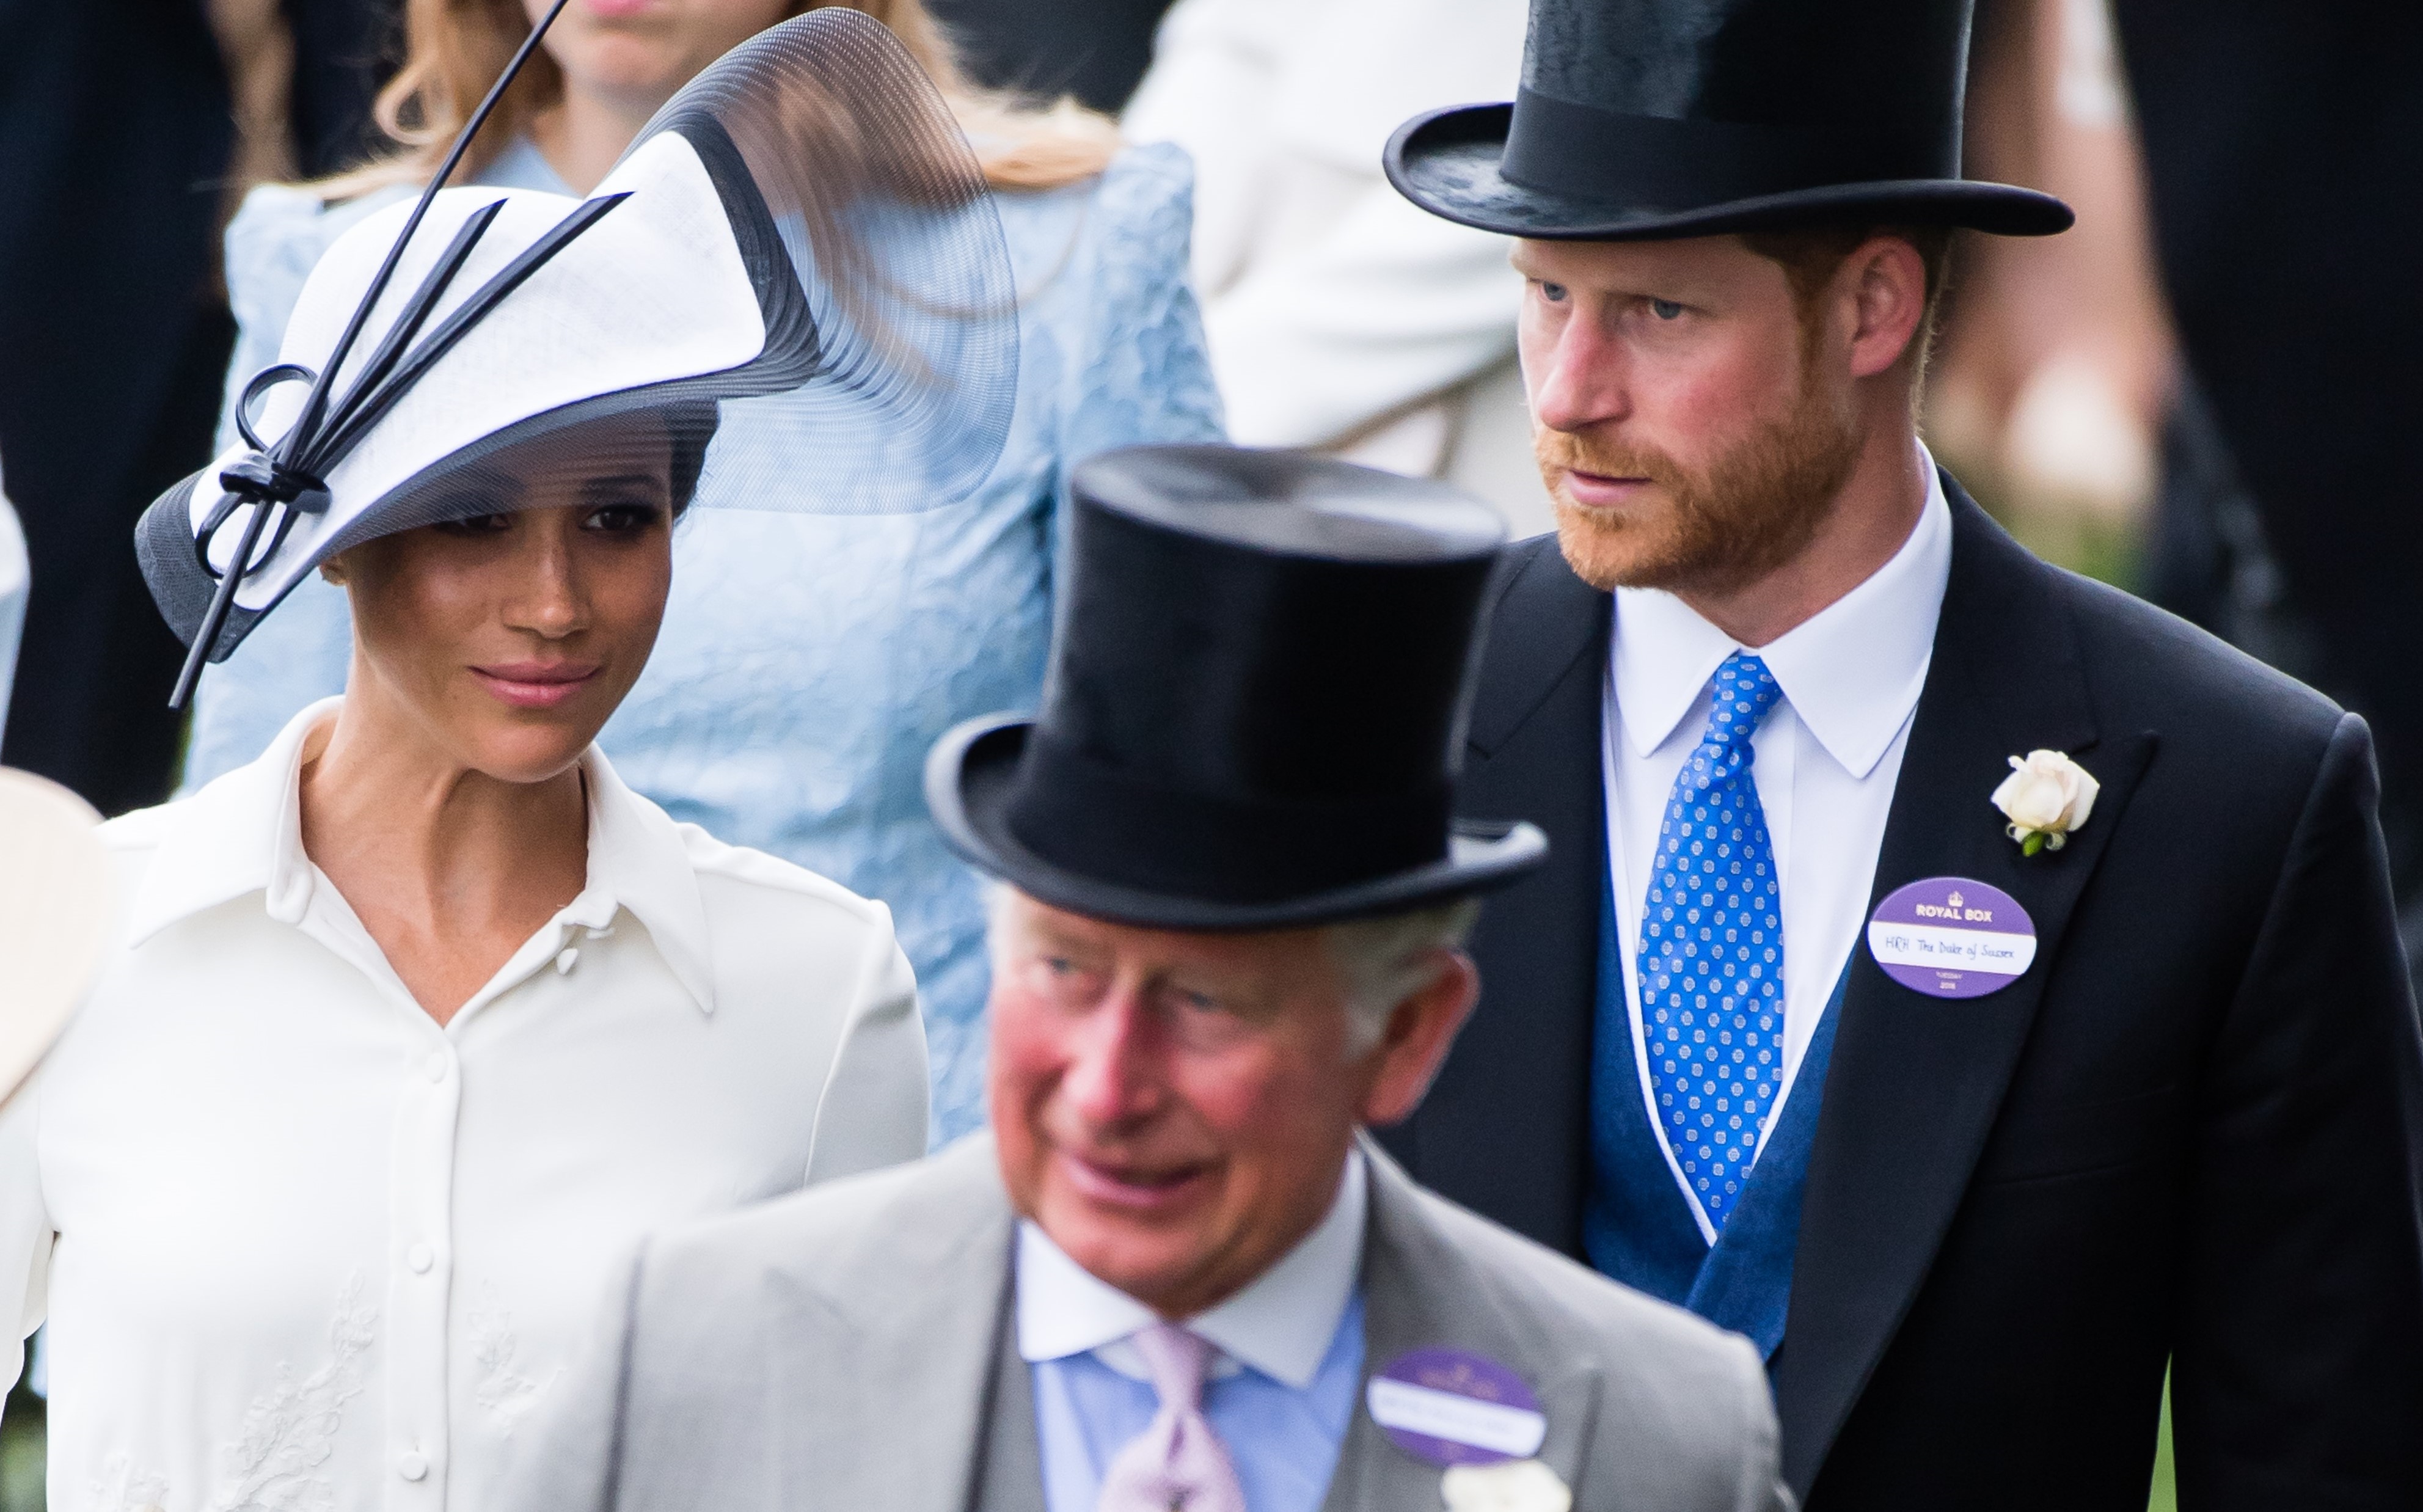 Meghan Markle, Prince Harry, and Prince Charles attending the Royal Ascot Day 1